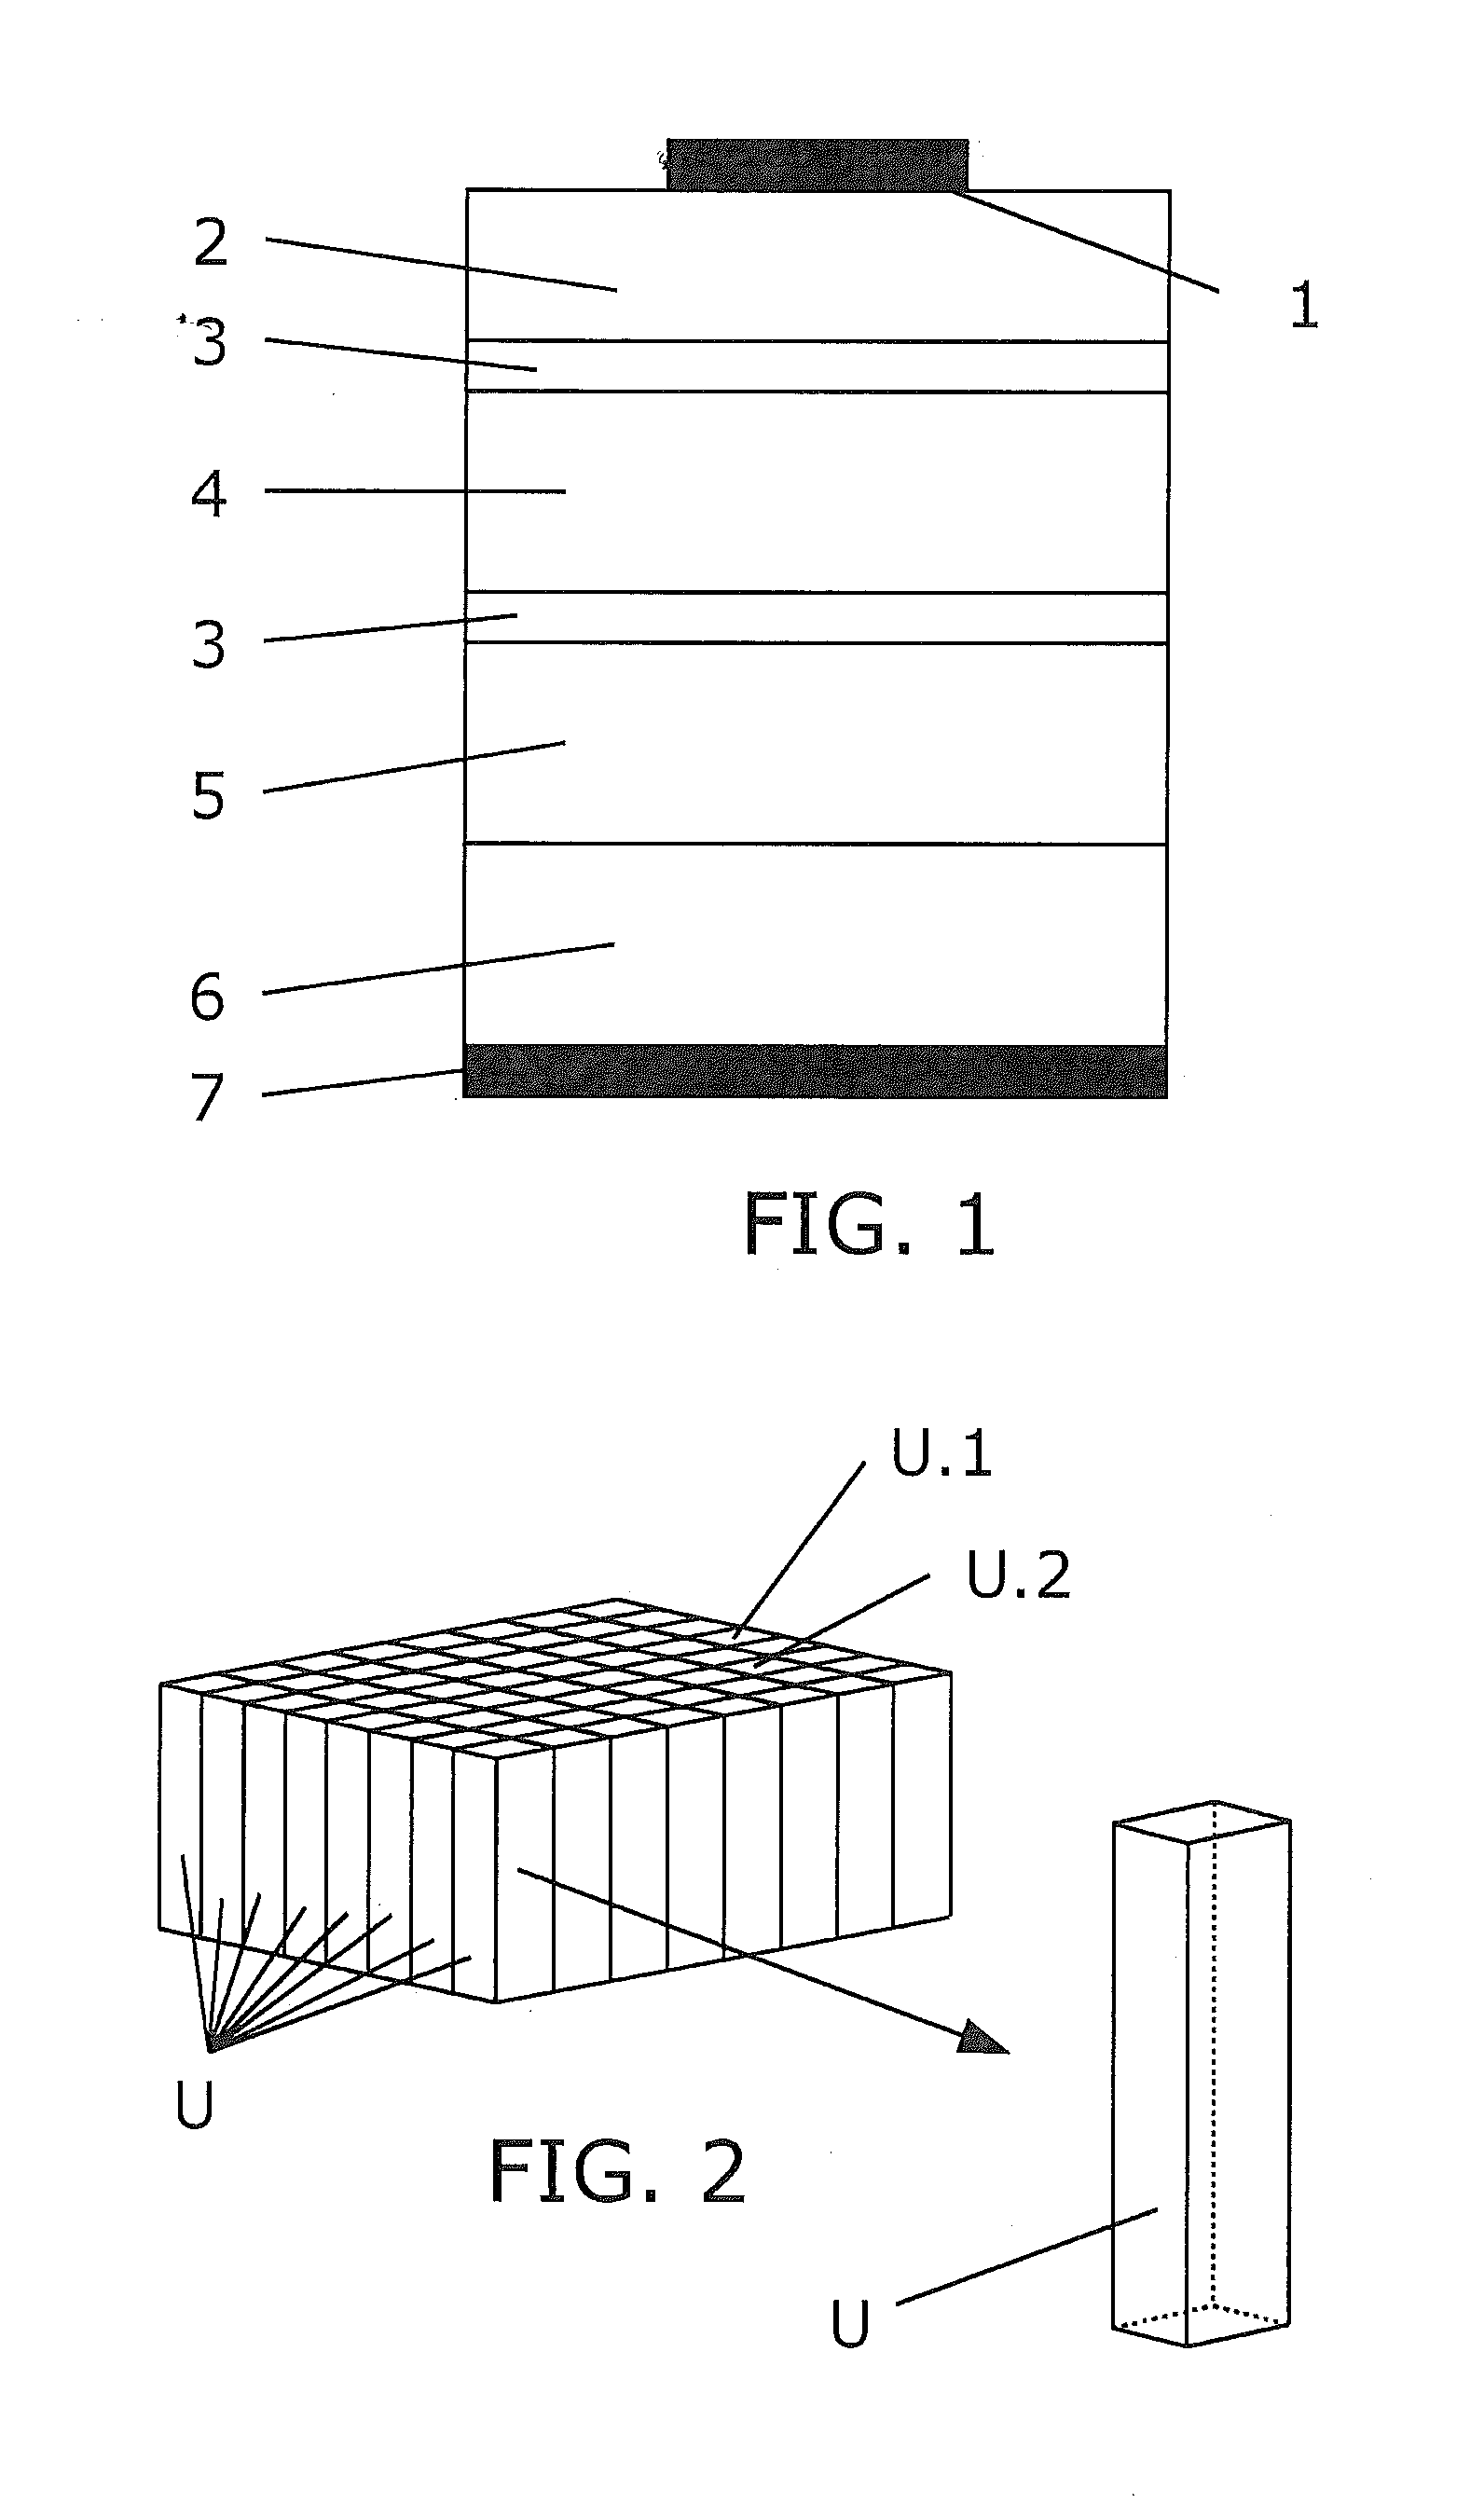 Method implemented in a computer for the numerical simulation of semiconductor devices containing tunnel junctions